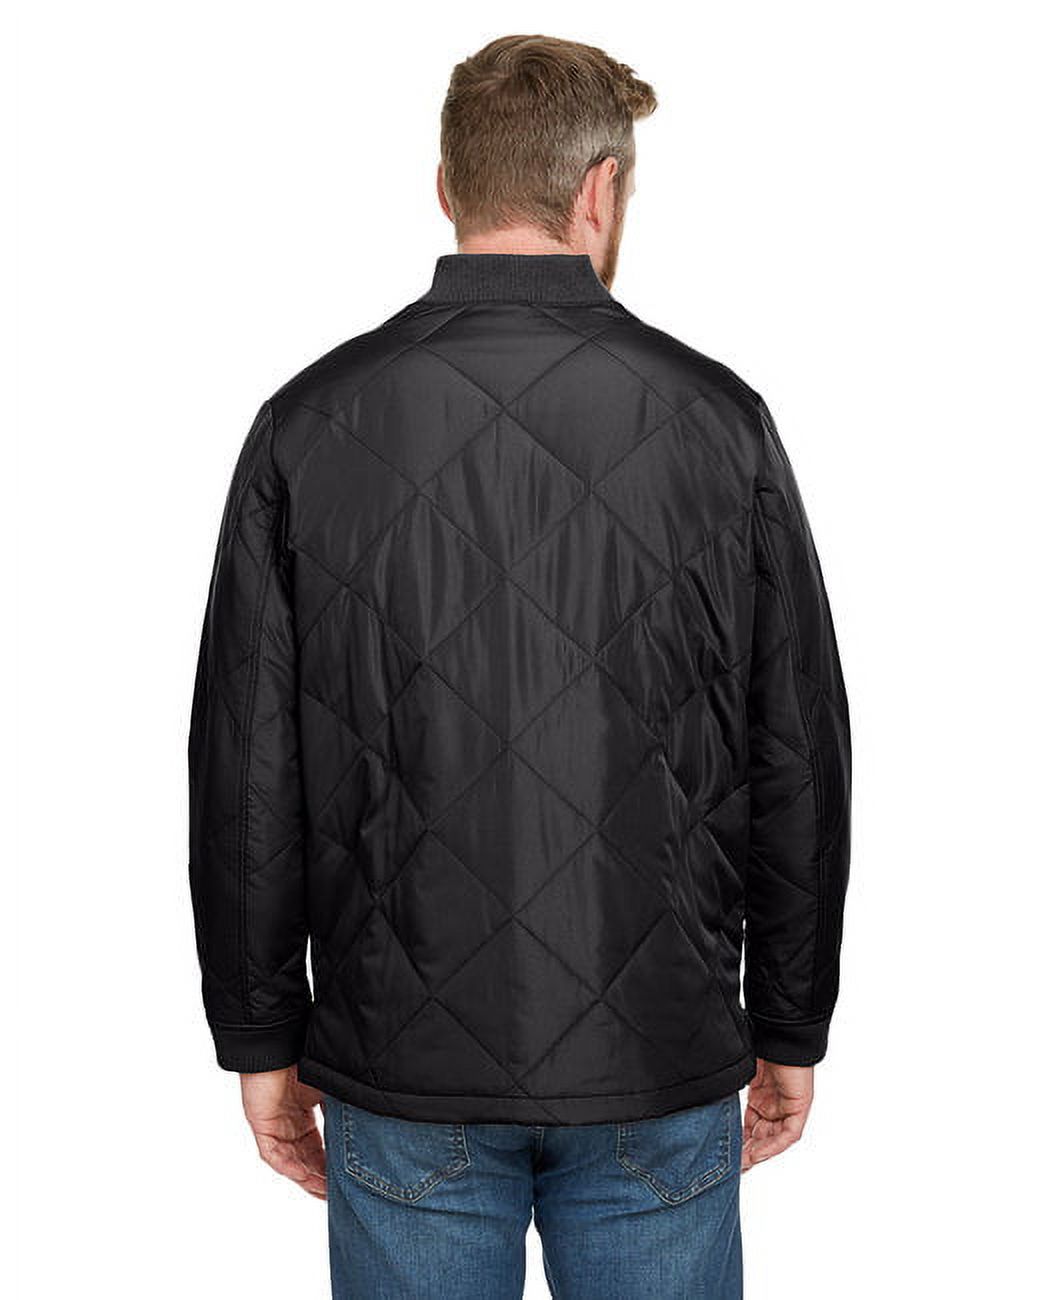 Adult Dockside Insulated Utility Jacket - DARK CHARCOAL - S - image 2 of 3